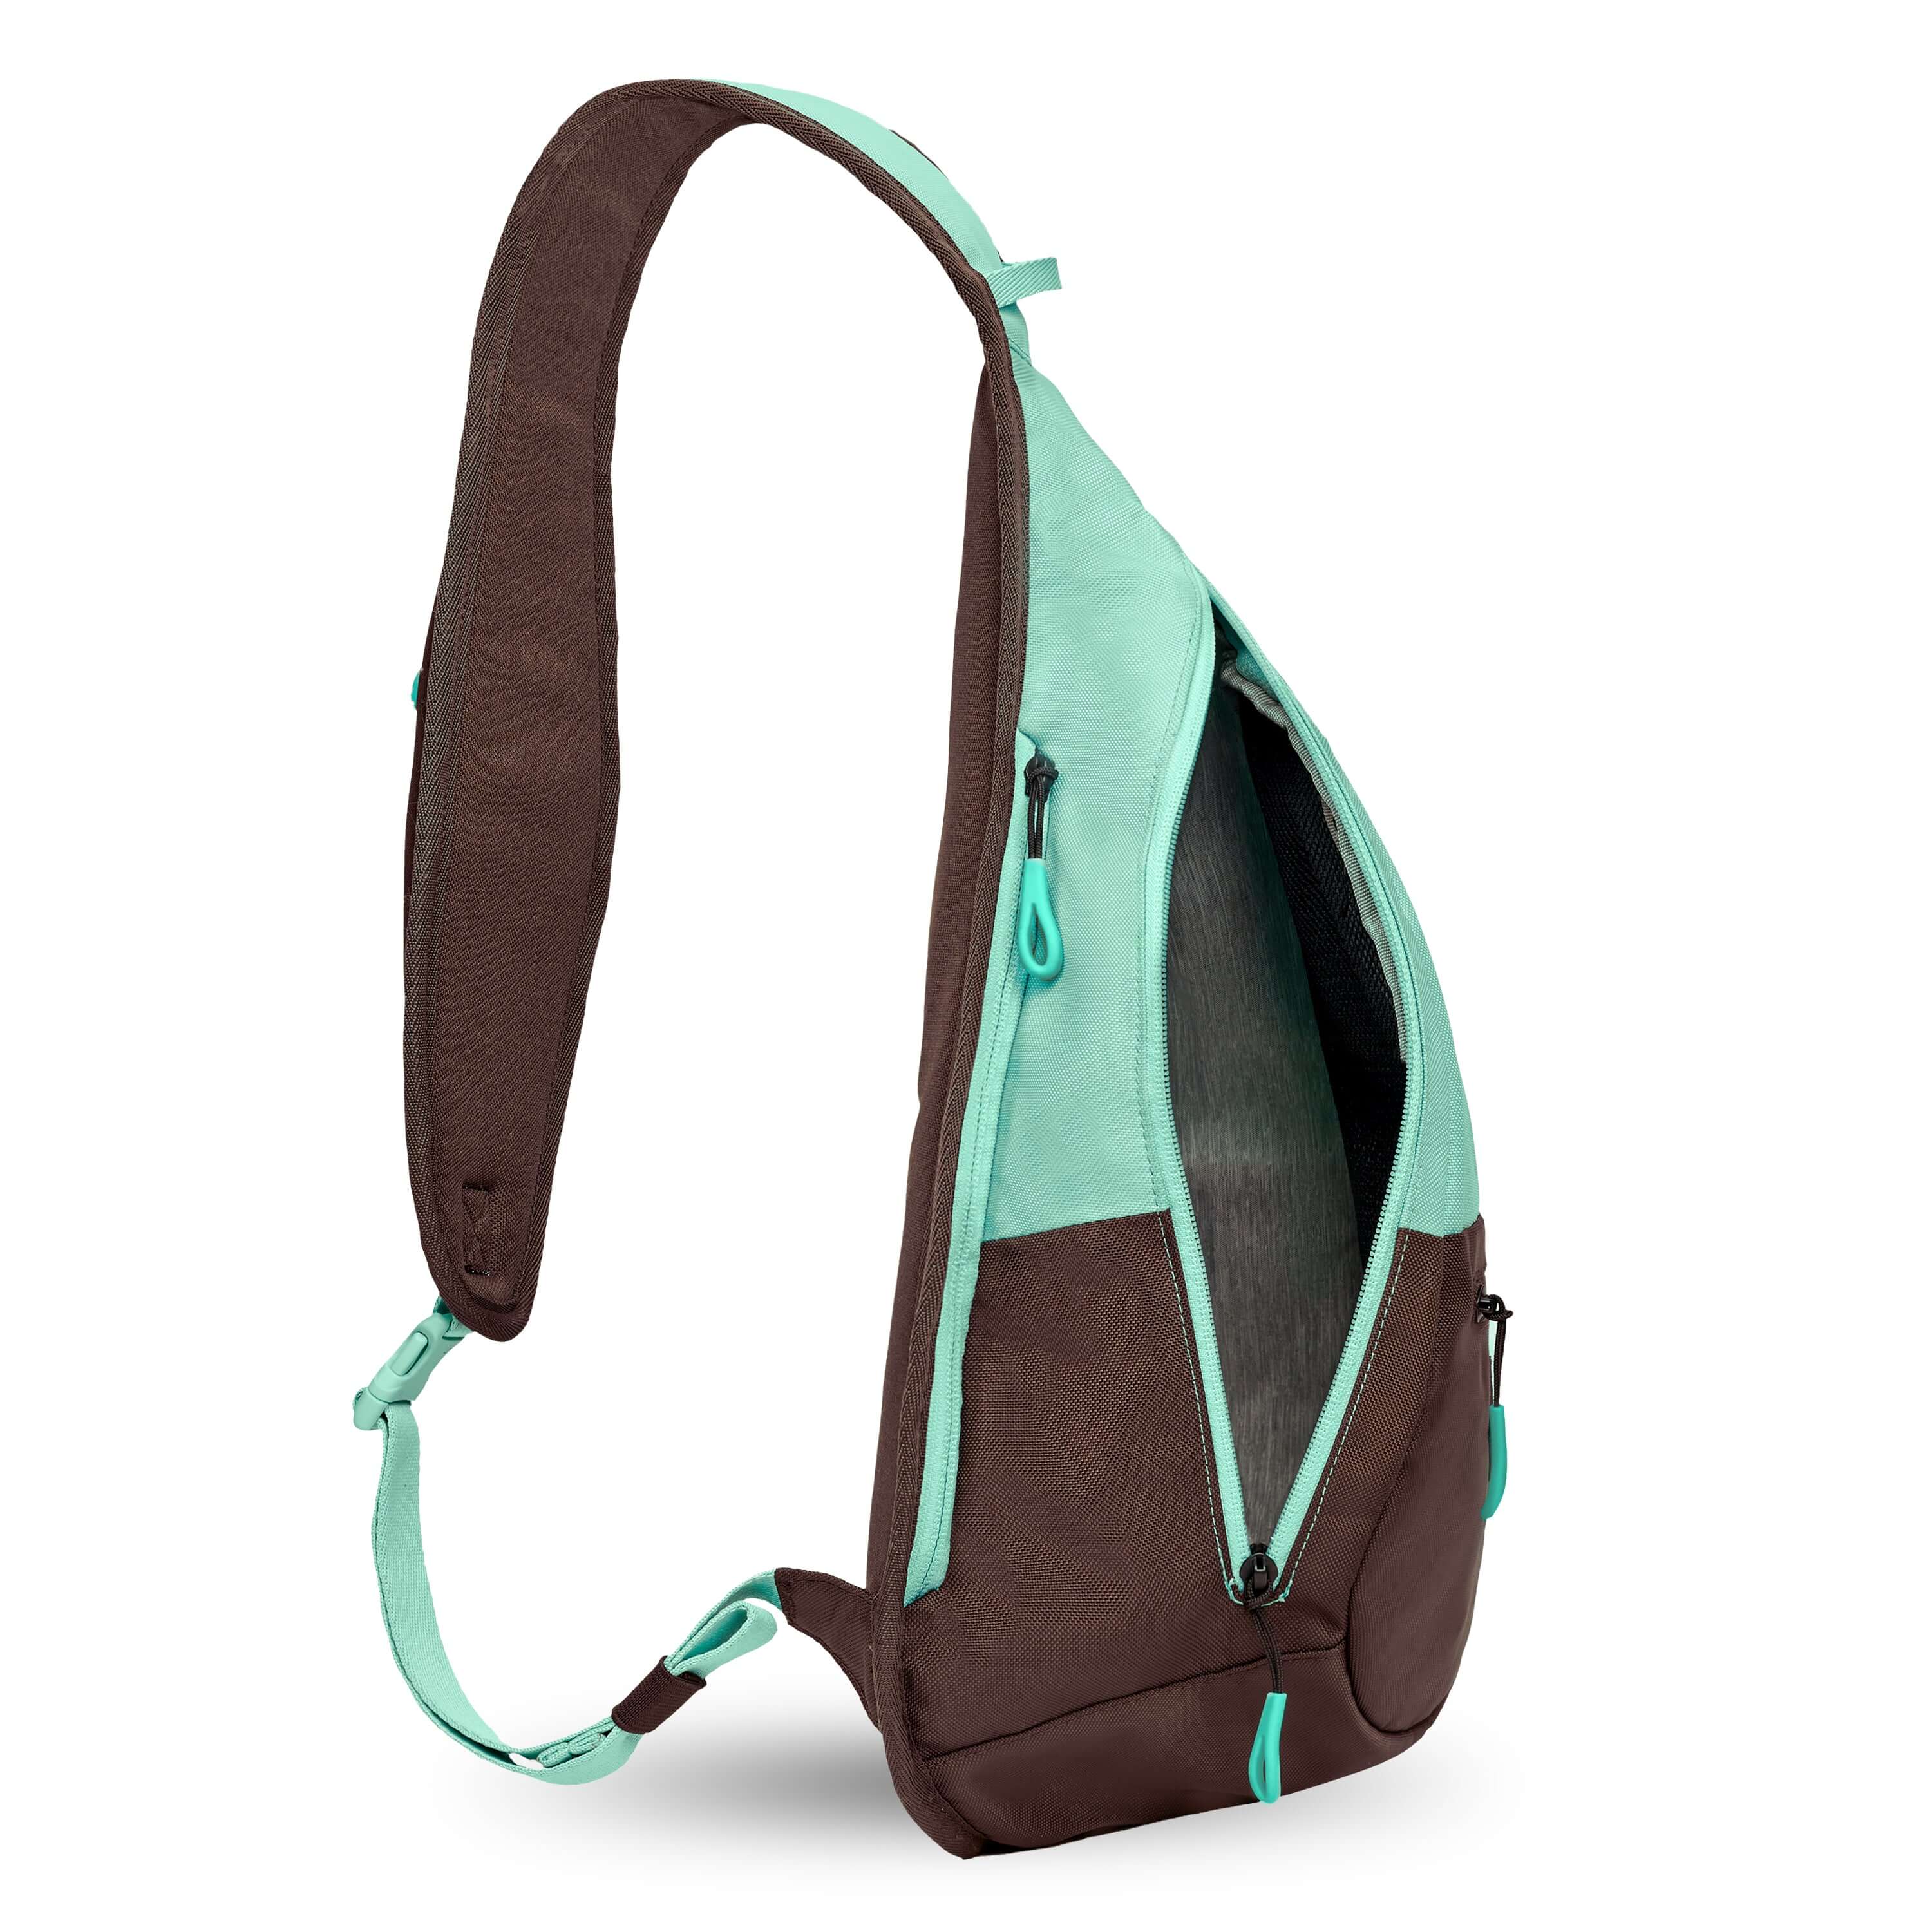 Side view of Sherpani's bag, the Esprit in Seagreen. The main zipper compartment is open to reveal a light gray interior. 